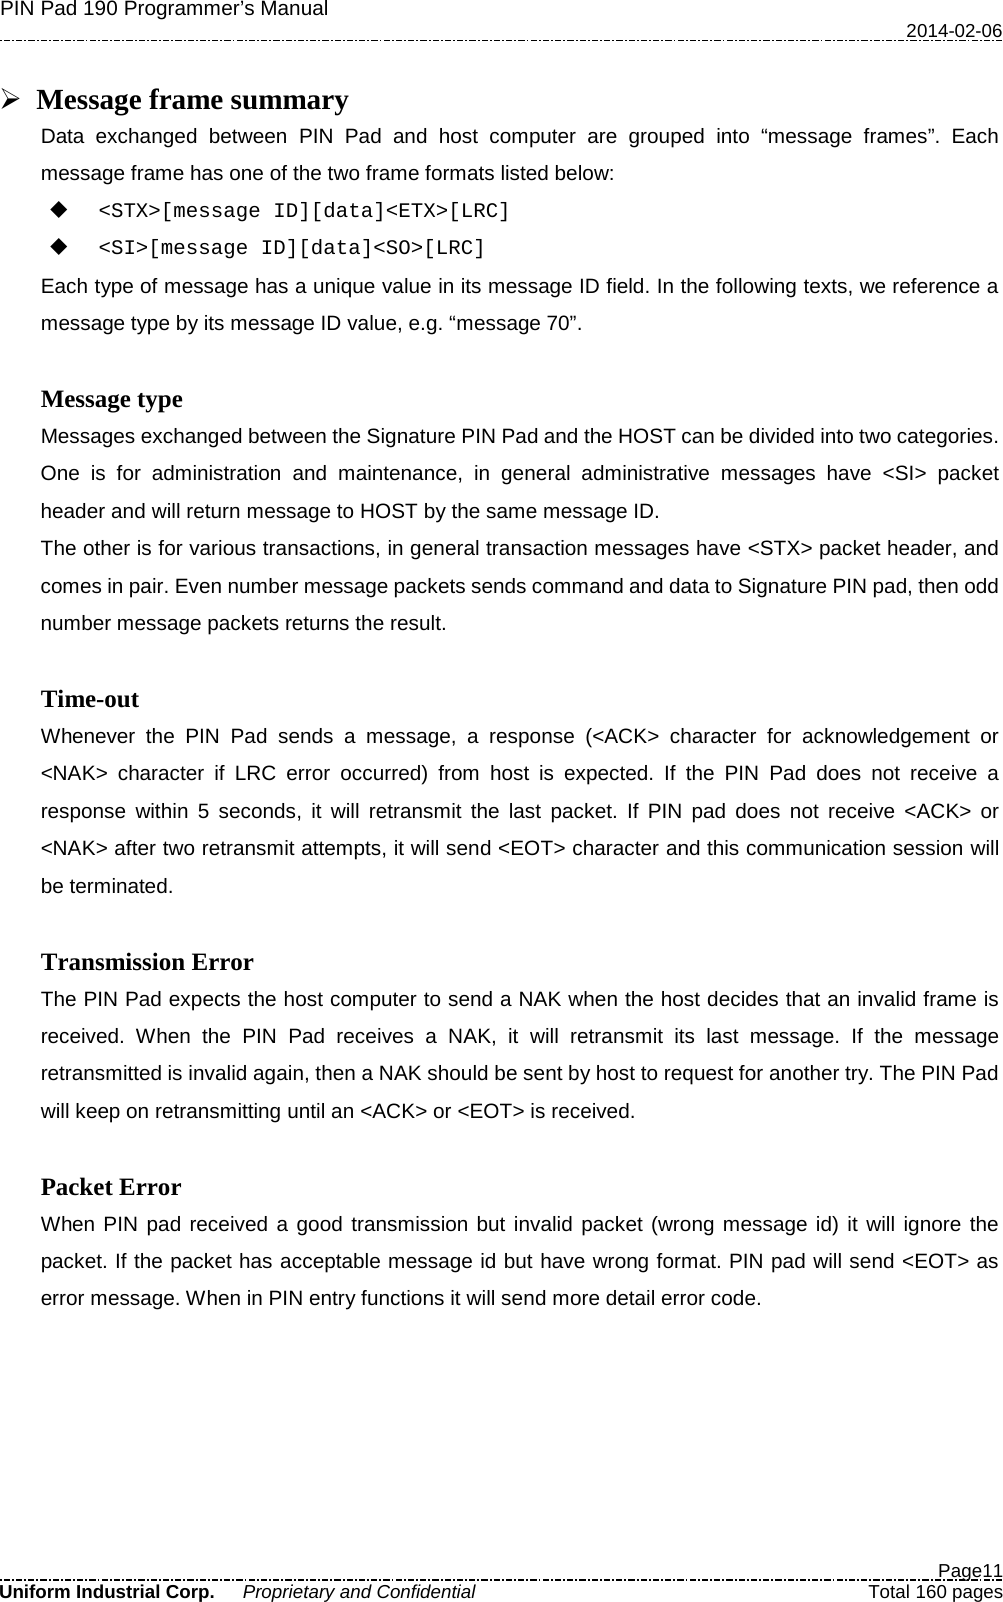 PIN Pad 190 Programmer’s Manual   2014-02-06  Page11 Uniform Industrial Corp. Proprietary and Confidential  Total 160 pages   Message frame summary Data exchanged between PIN Pad and host computer are grouped into “message frames”. Each message frame has one of the two frame formats listed below:  &lt;STX&gt;[message ID][data]&lt;ETX&gt;[LRC]  &lt;SI&gt;[message ID][data]&lt;SO&gt;[LRC] Each type of message has a unique value in its message ID field. In the following texts, we reference a message type by its message ID value, e.g. “message 70”.  Message type Messages exchanged between the Signature PIN Pad and the HOST can be divided into two categories.   One is for administration and maintenance, in general administrative messages have &lt;SI&gt; packet header and will return message to HOST by the same message ID.   The other is for various transactions, in general transaction messages have &lt;STX&gt; packet header, and comes in pair. Even number message packets sends command and data to Signature PIN pad, then odd number message packets returns the result.  Time-out Whenever the PIN Pad sends a message, a response (&lt;ACK&gt; character for acknowledgement or &lt;NAK&gt; character if LRC error occurred) from host is expected. If the PIN Pad does not receive a response within 5 seconds, it will retransmit the last packet. If PIN pad does not receive &lt;ACK&gt; or &lt;NAK&gt; after two retransmit attempts, it will send &lt;EOT&gt; character and this communication session will be terminated.  Transmission Error The PIN Pad expects the host computer to send a NAK when the host decides that an invalid frame is received. When the PIN Pad receives a NAK, it will retransmit its last message. If the message retransmitted is invalid again, then a NAK should be sent by host to request for another try. The PIN Pad will keep on retransmitting until an &lt;ACK&gt; or &lt;EOT&gt; is received.  Packet Error When PIN pad received a good transmission but invalid packet (wrong message id) it will ignore the packet. If the packet has acceptable message id but have wrong format. PIN pad will send &lt;EOT&gt; as error message. When in PIN entry functions it will send more detail error code.